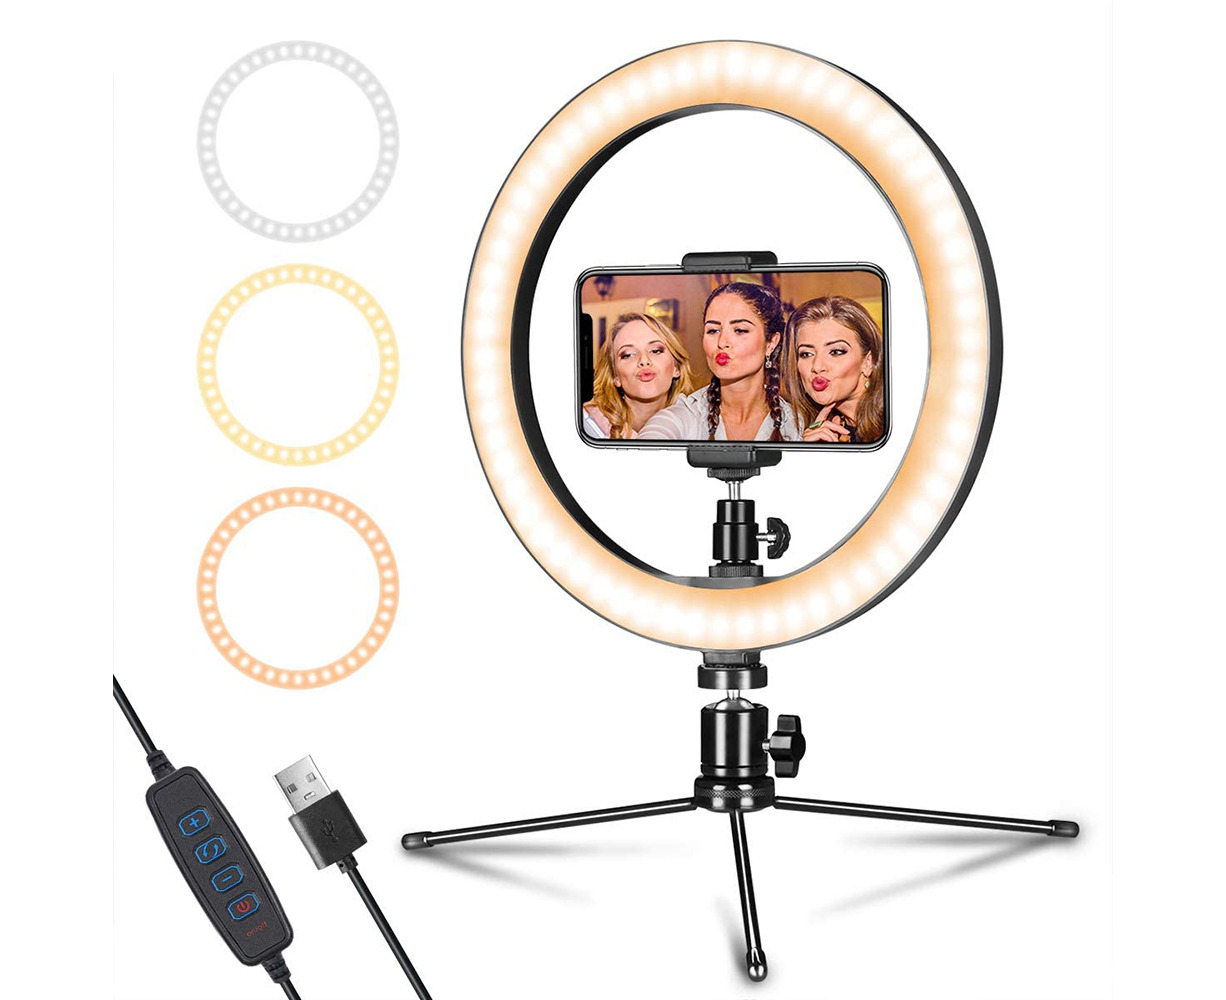 10 LED Ring Light with Mini Tripod Stand &Phone Holder.3 Dimmable Colors,10 Adjustable Brightness,Bluetooth remotes for Live Streaming/Vlogging/Portrait Shooting Compatible with Smartphones/Go-pro 